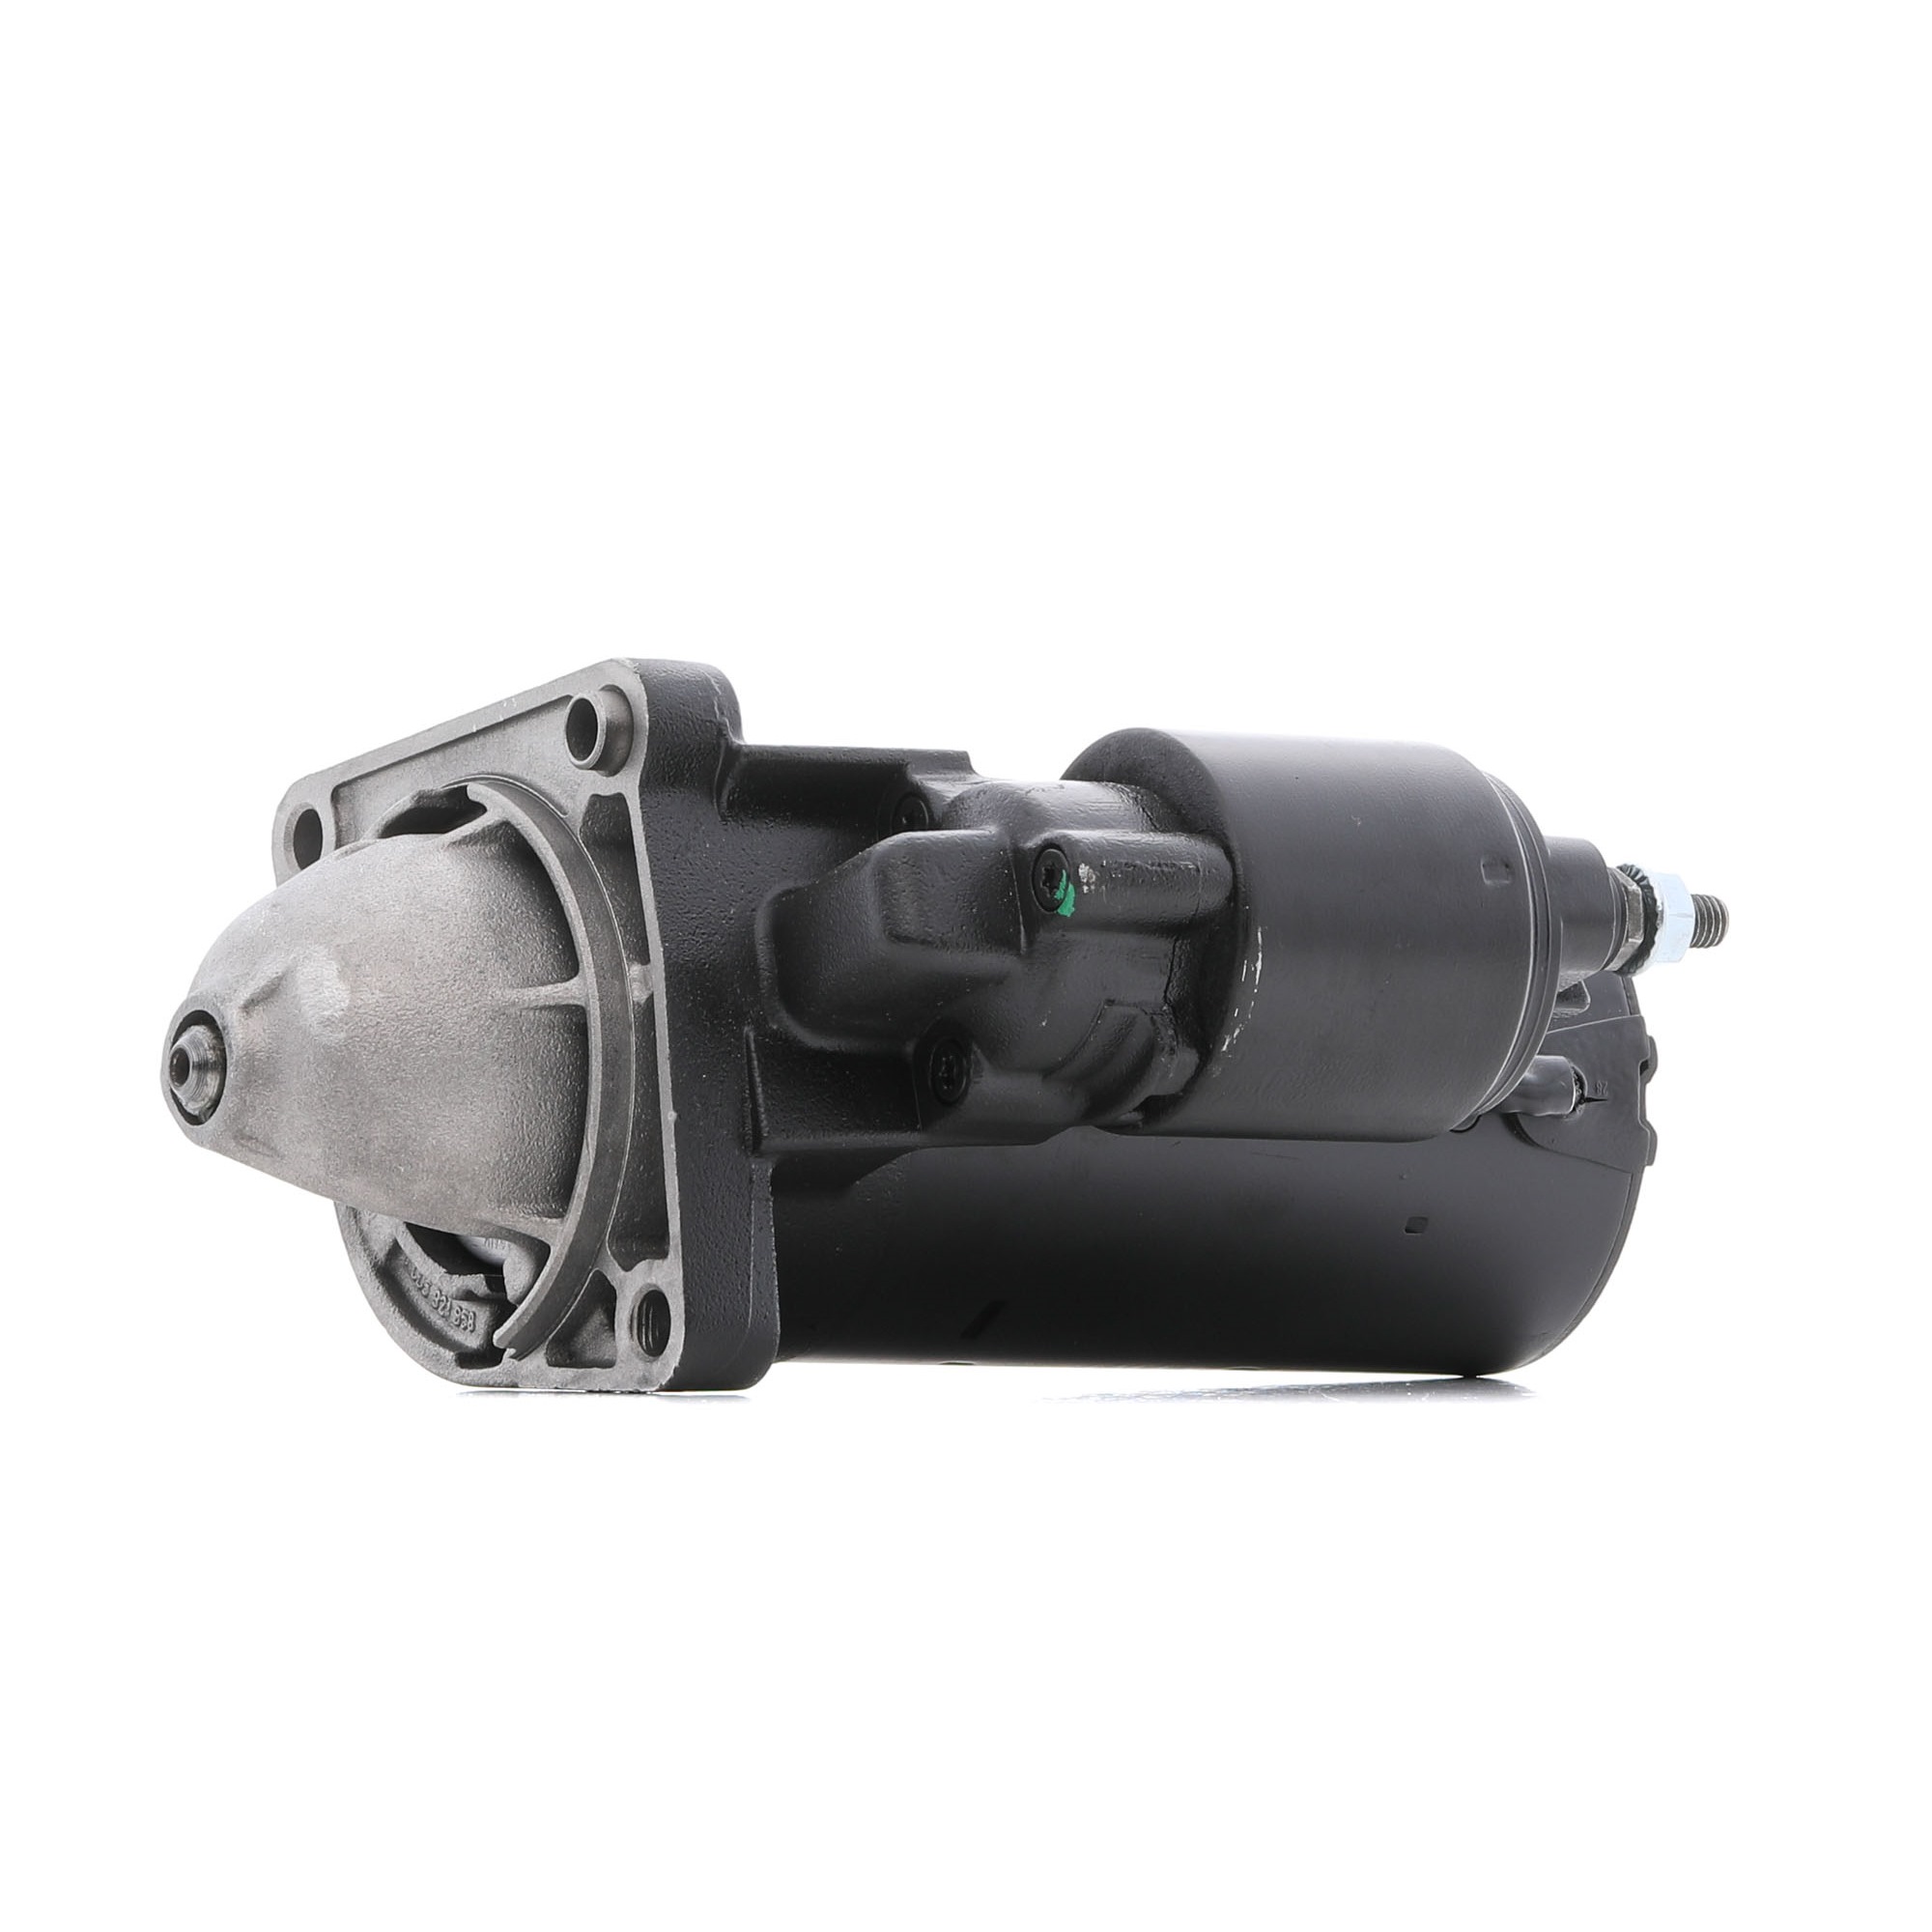 RIDEX REMAN 2S0010R Starter motor 12V, 2kW, Number of Teeth: 9,11, with 50(Jet) clamp, Ø 82 mm